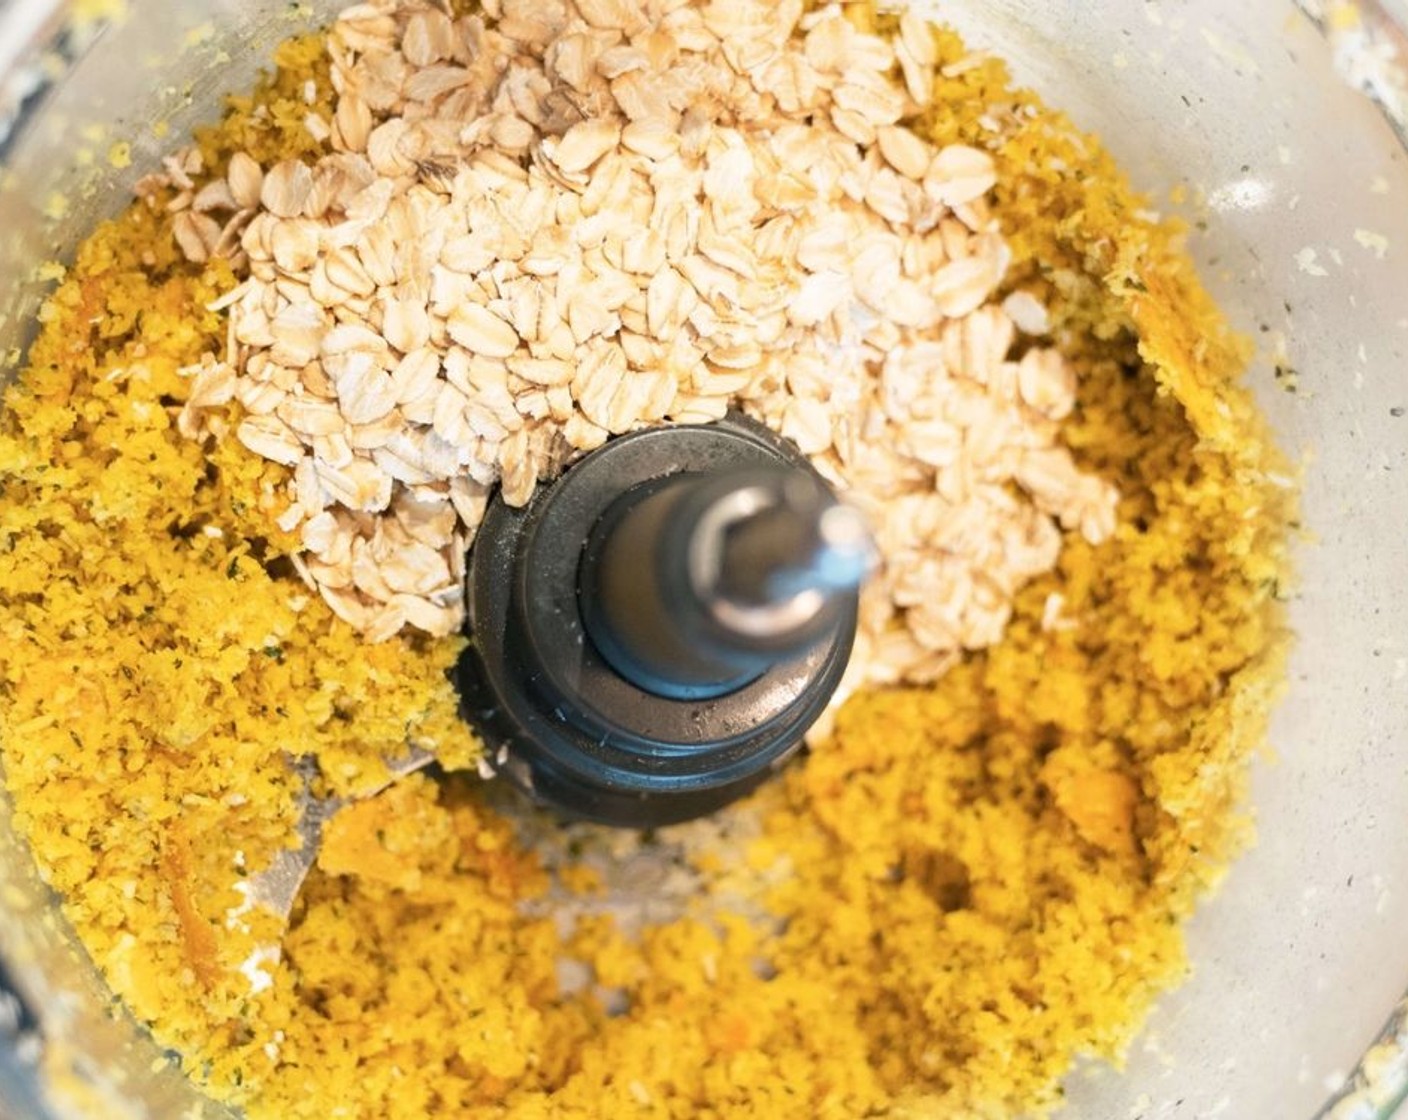 step 1 Place Unsweetened Shredded Coconut (1 cup), Old Fashioned Rolled Oats (1/2 cup), Dried Mangoes (1/2 cup), Hemp Hearts (1/4 cup), Ground Turmeric (1 tsp), and 2 Tbsp of Lemon (1) into a high power blender and blitz until it forms a texture that you can roll into balls.